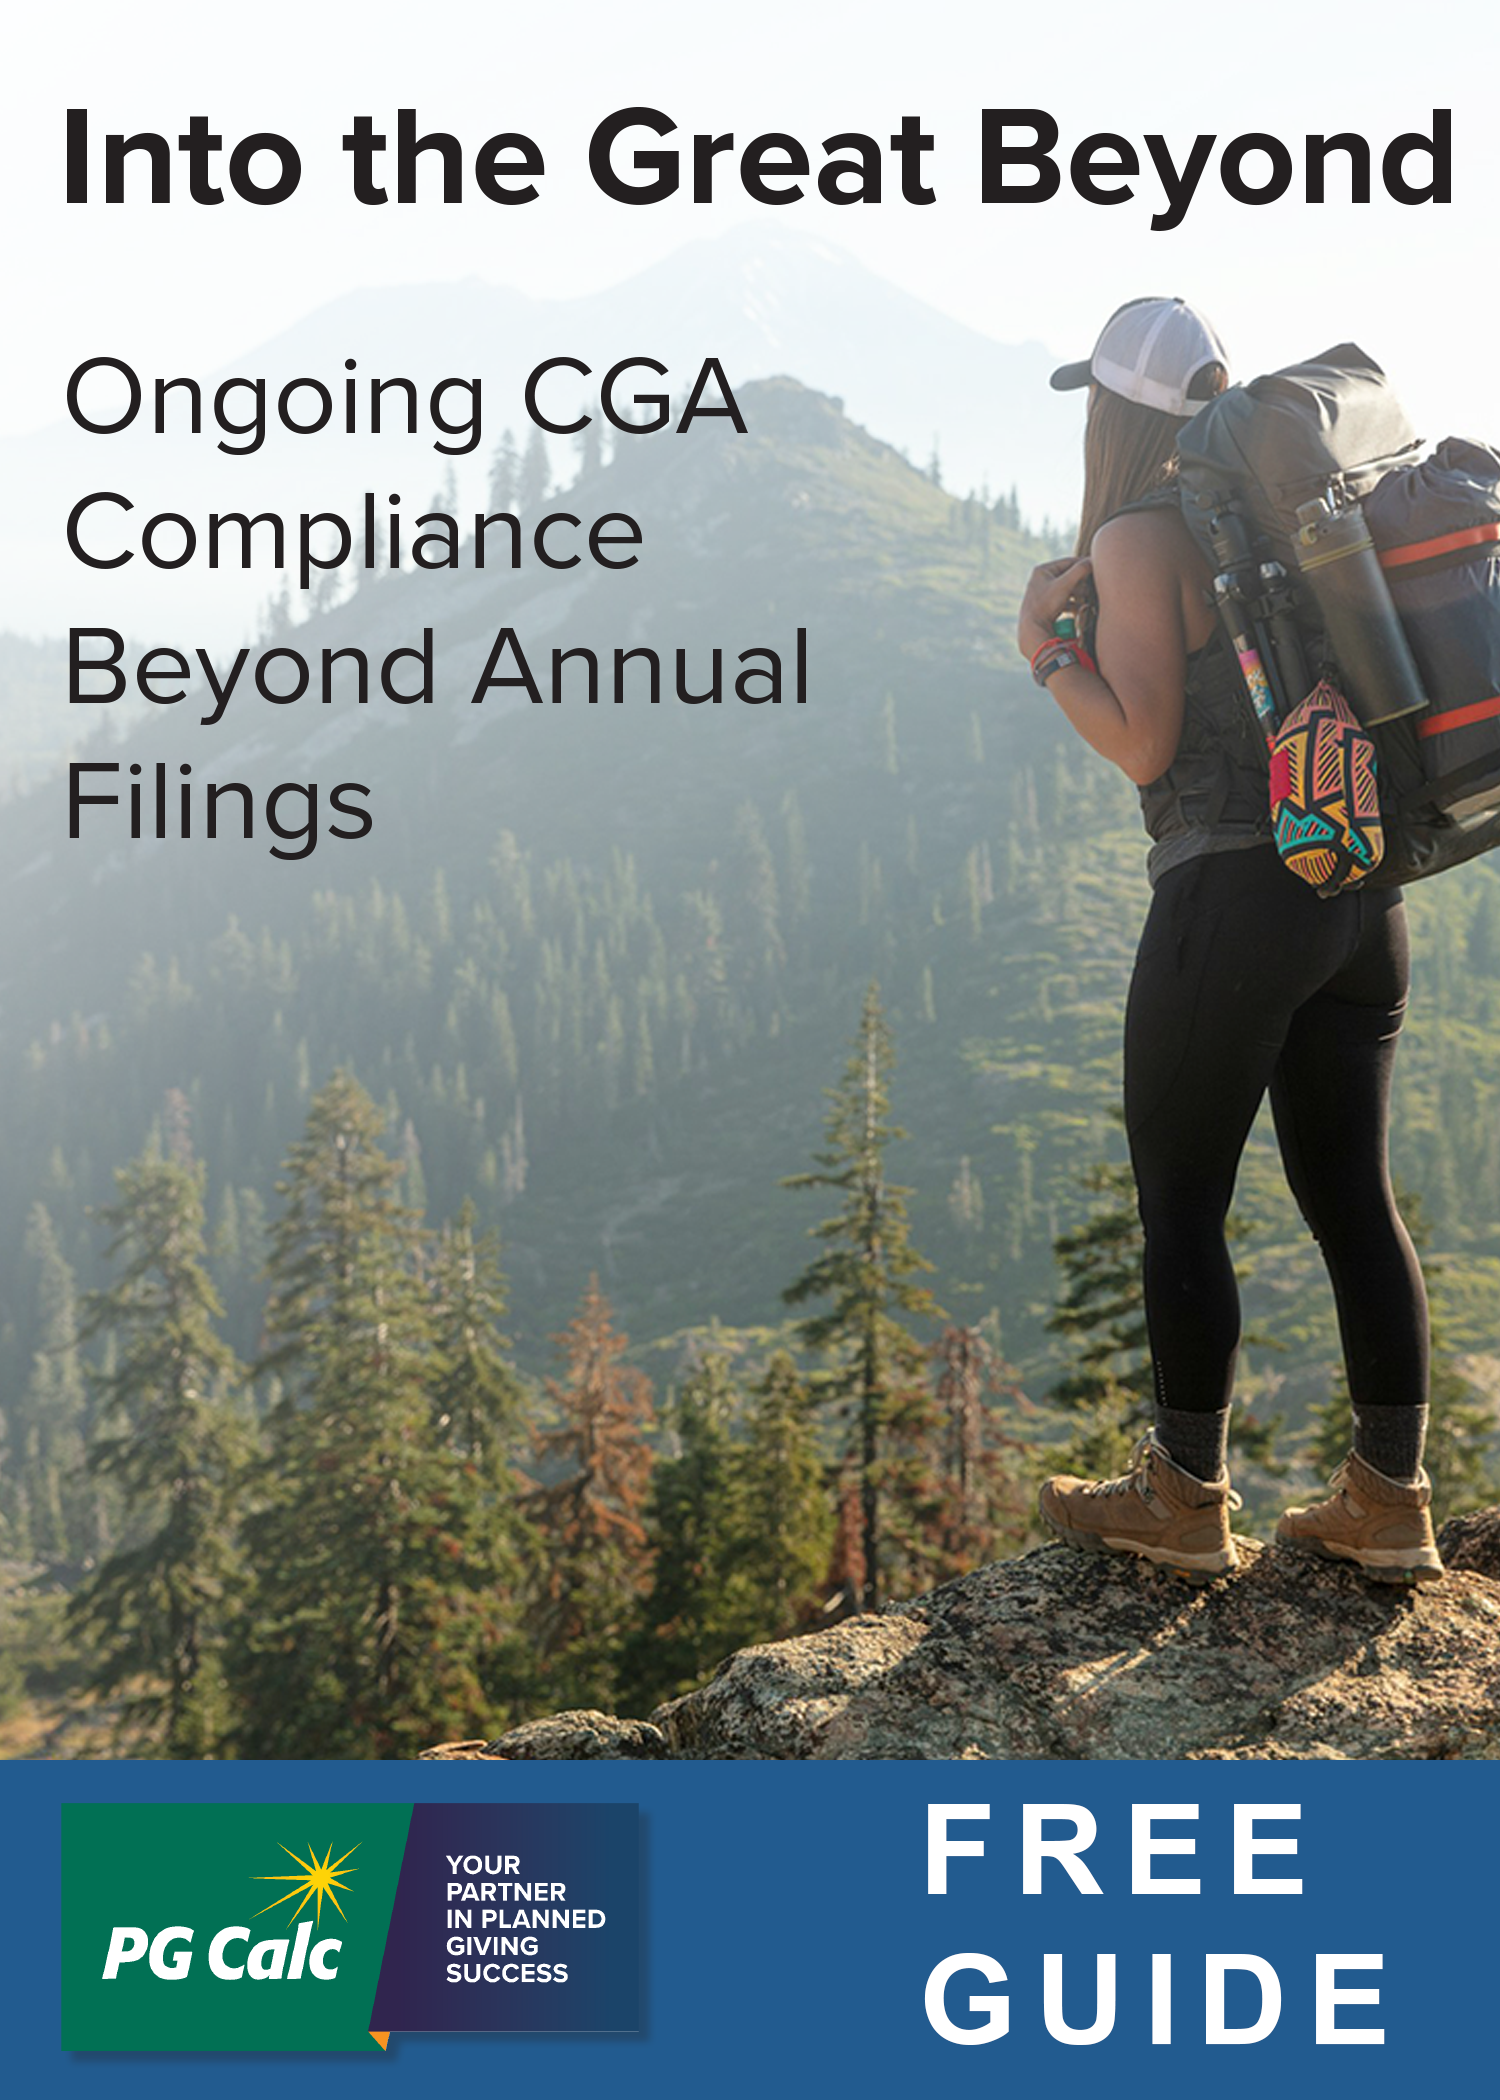 Into the great beyond: Ongoing CGA Compliance Beyond Annual Filings - Free Guide